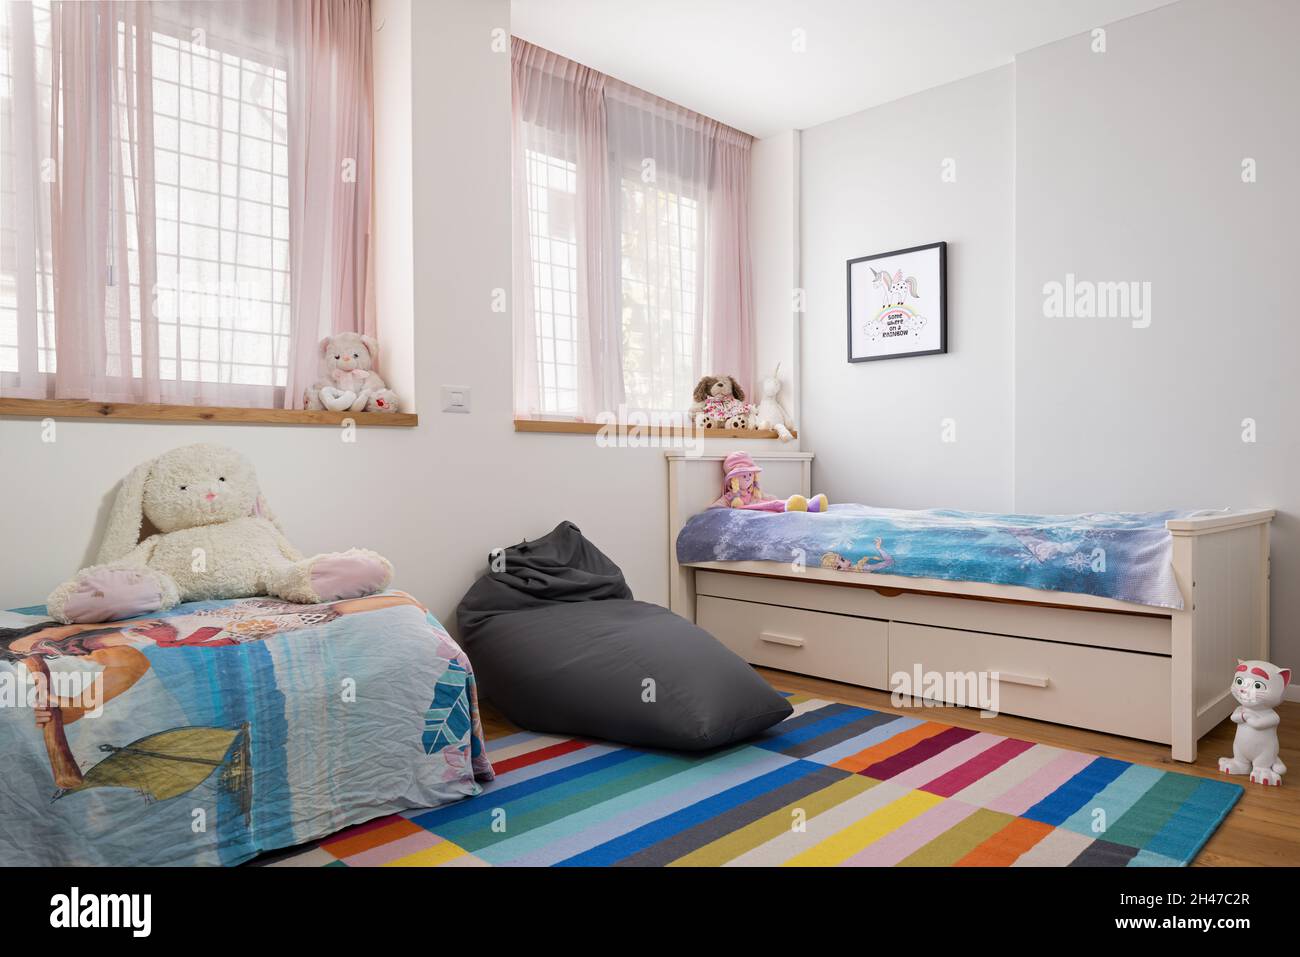 Children's room with two beds, soft pink curtains, colorful rug, beanbag beanie and dolls Stock Photo